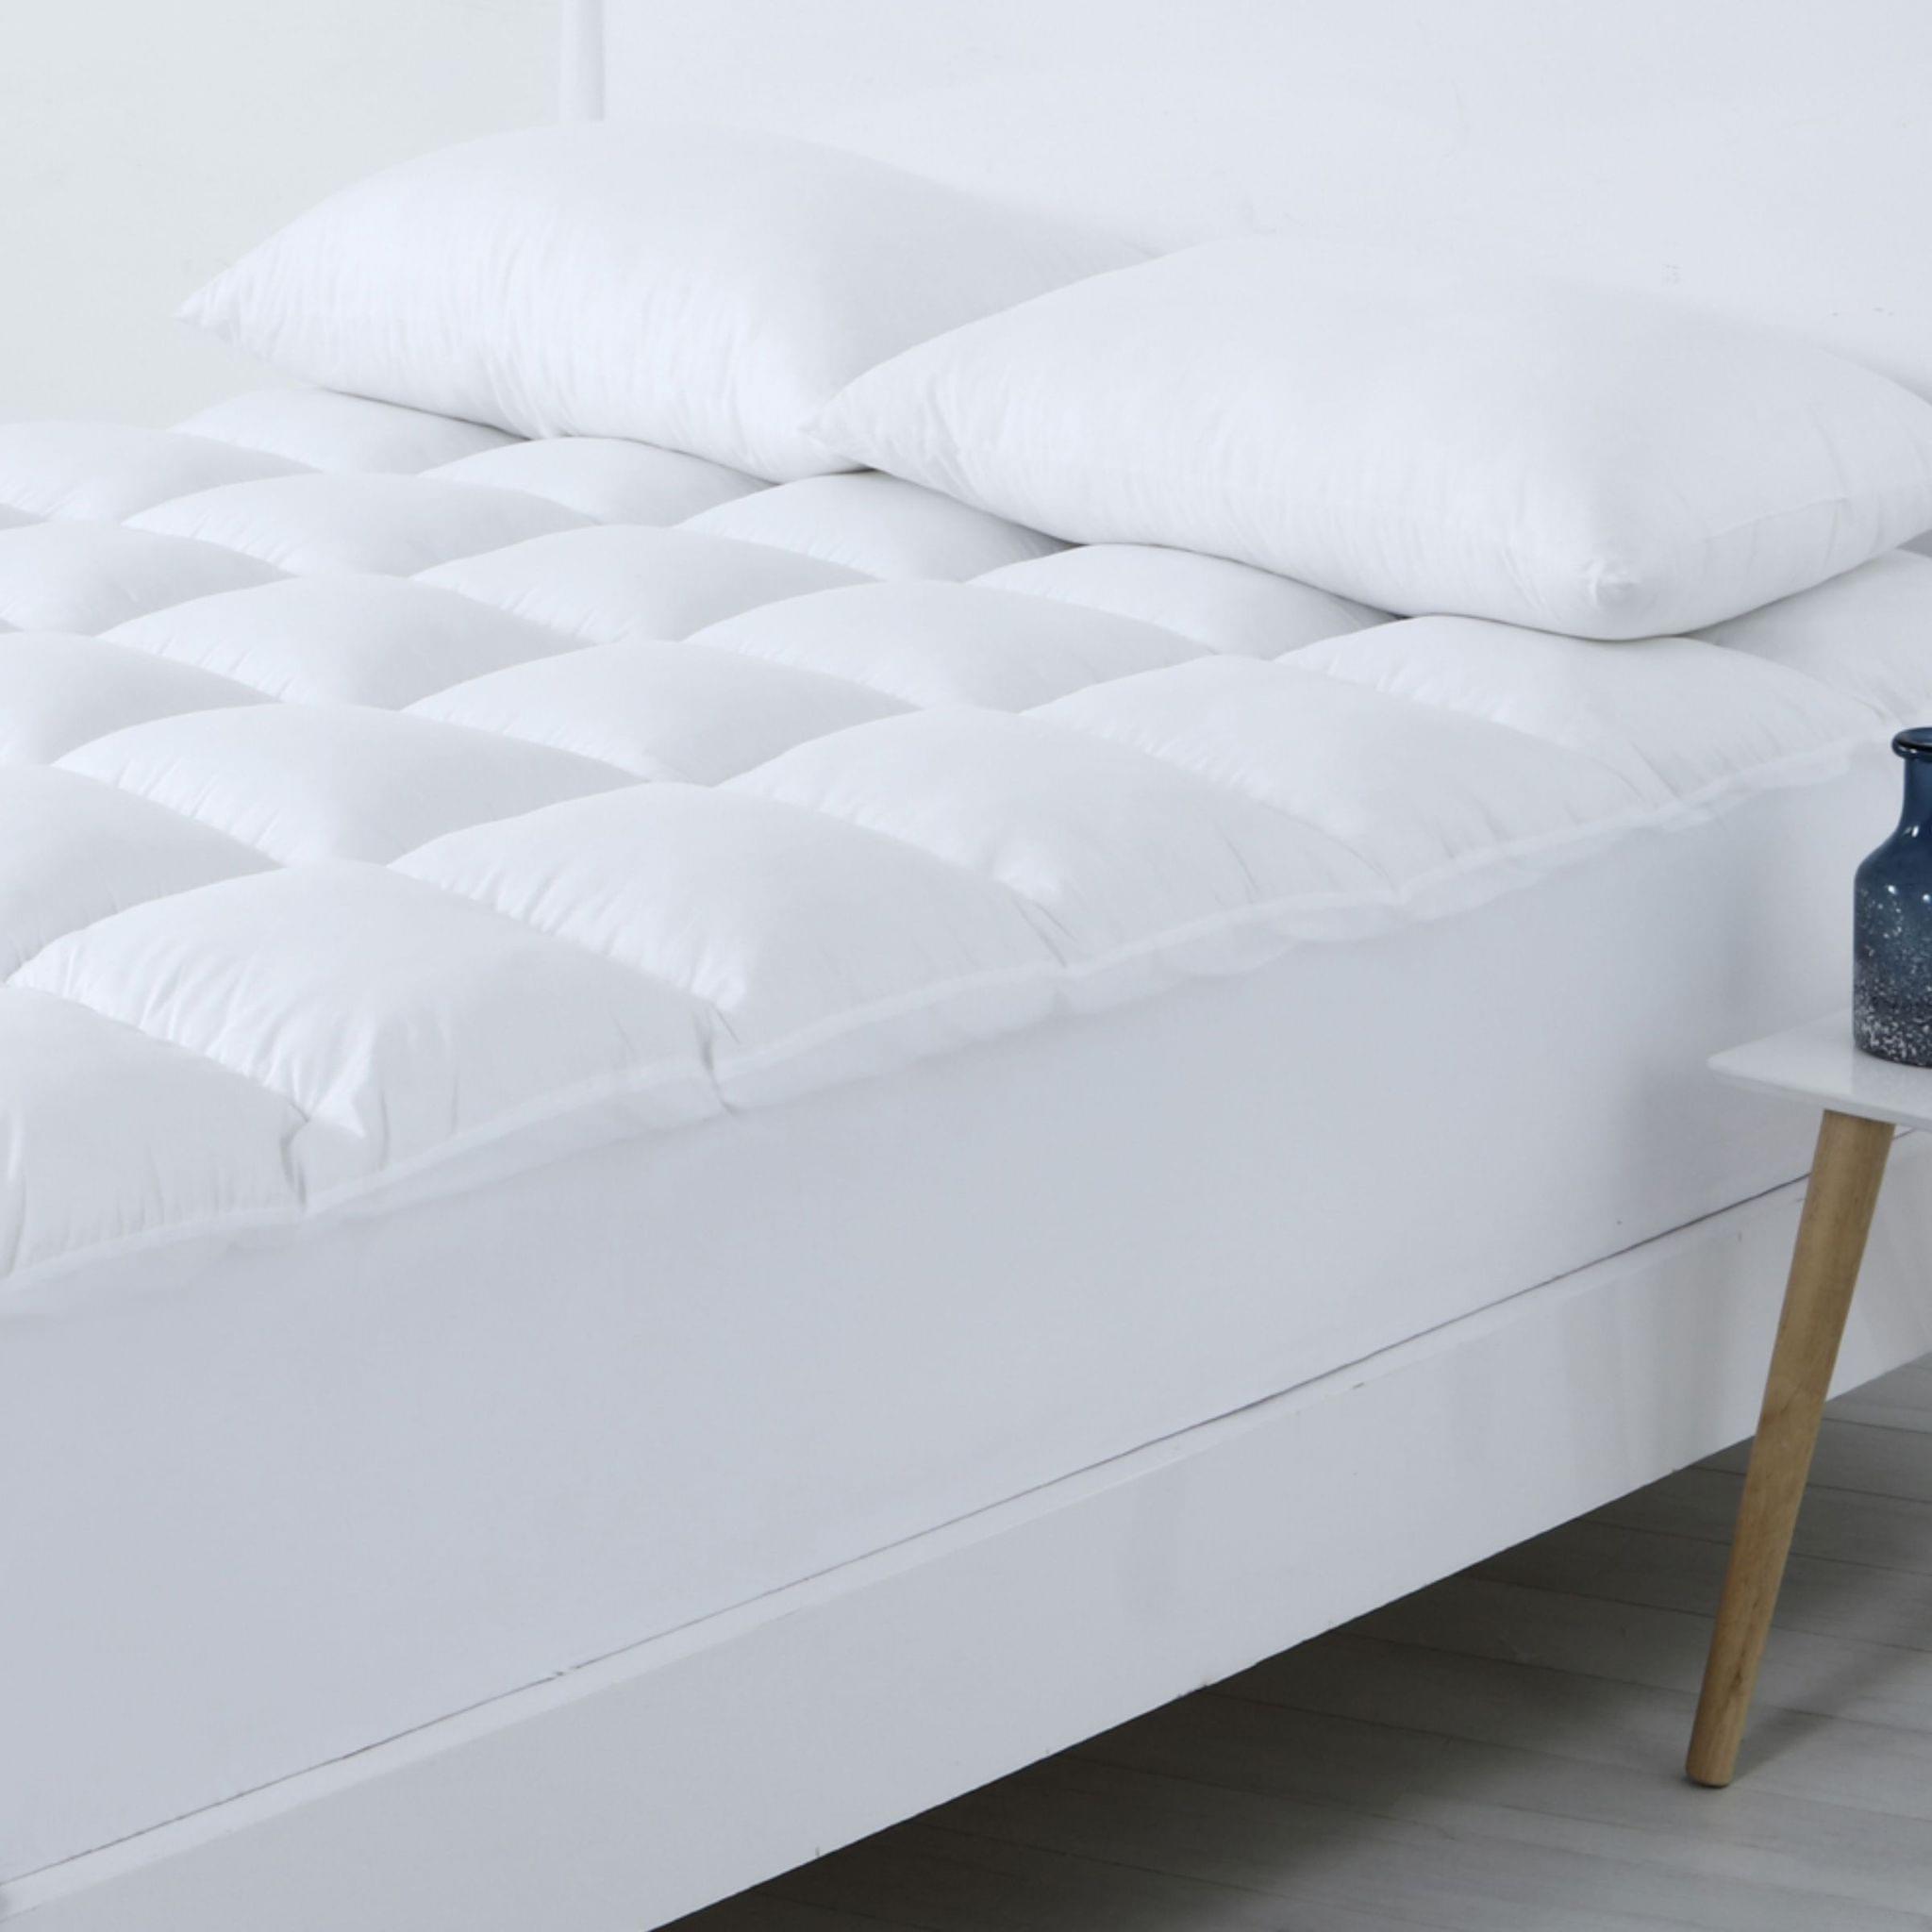 Ultra Soft Fitted Style Mattress Topper King White